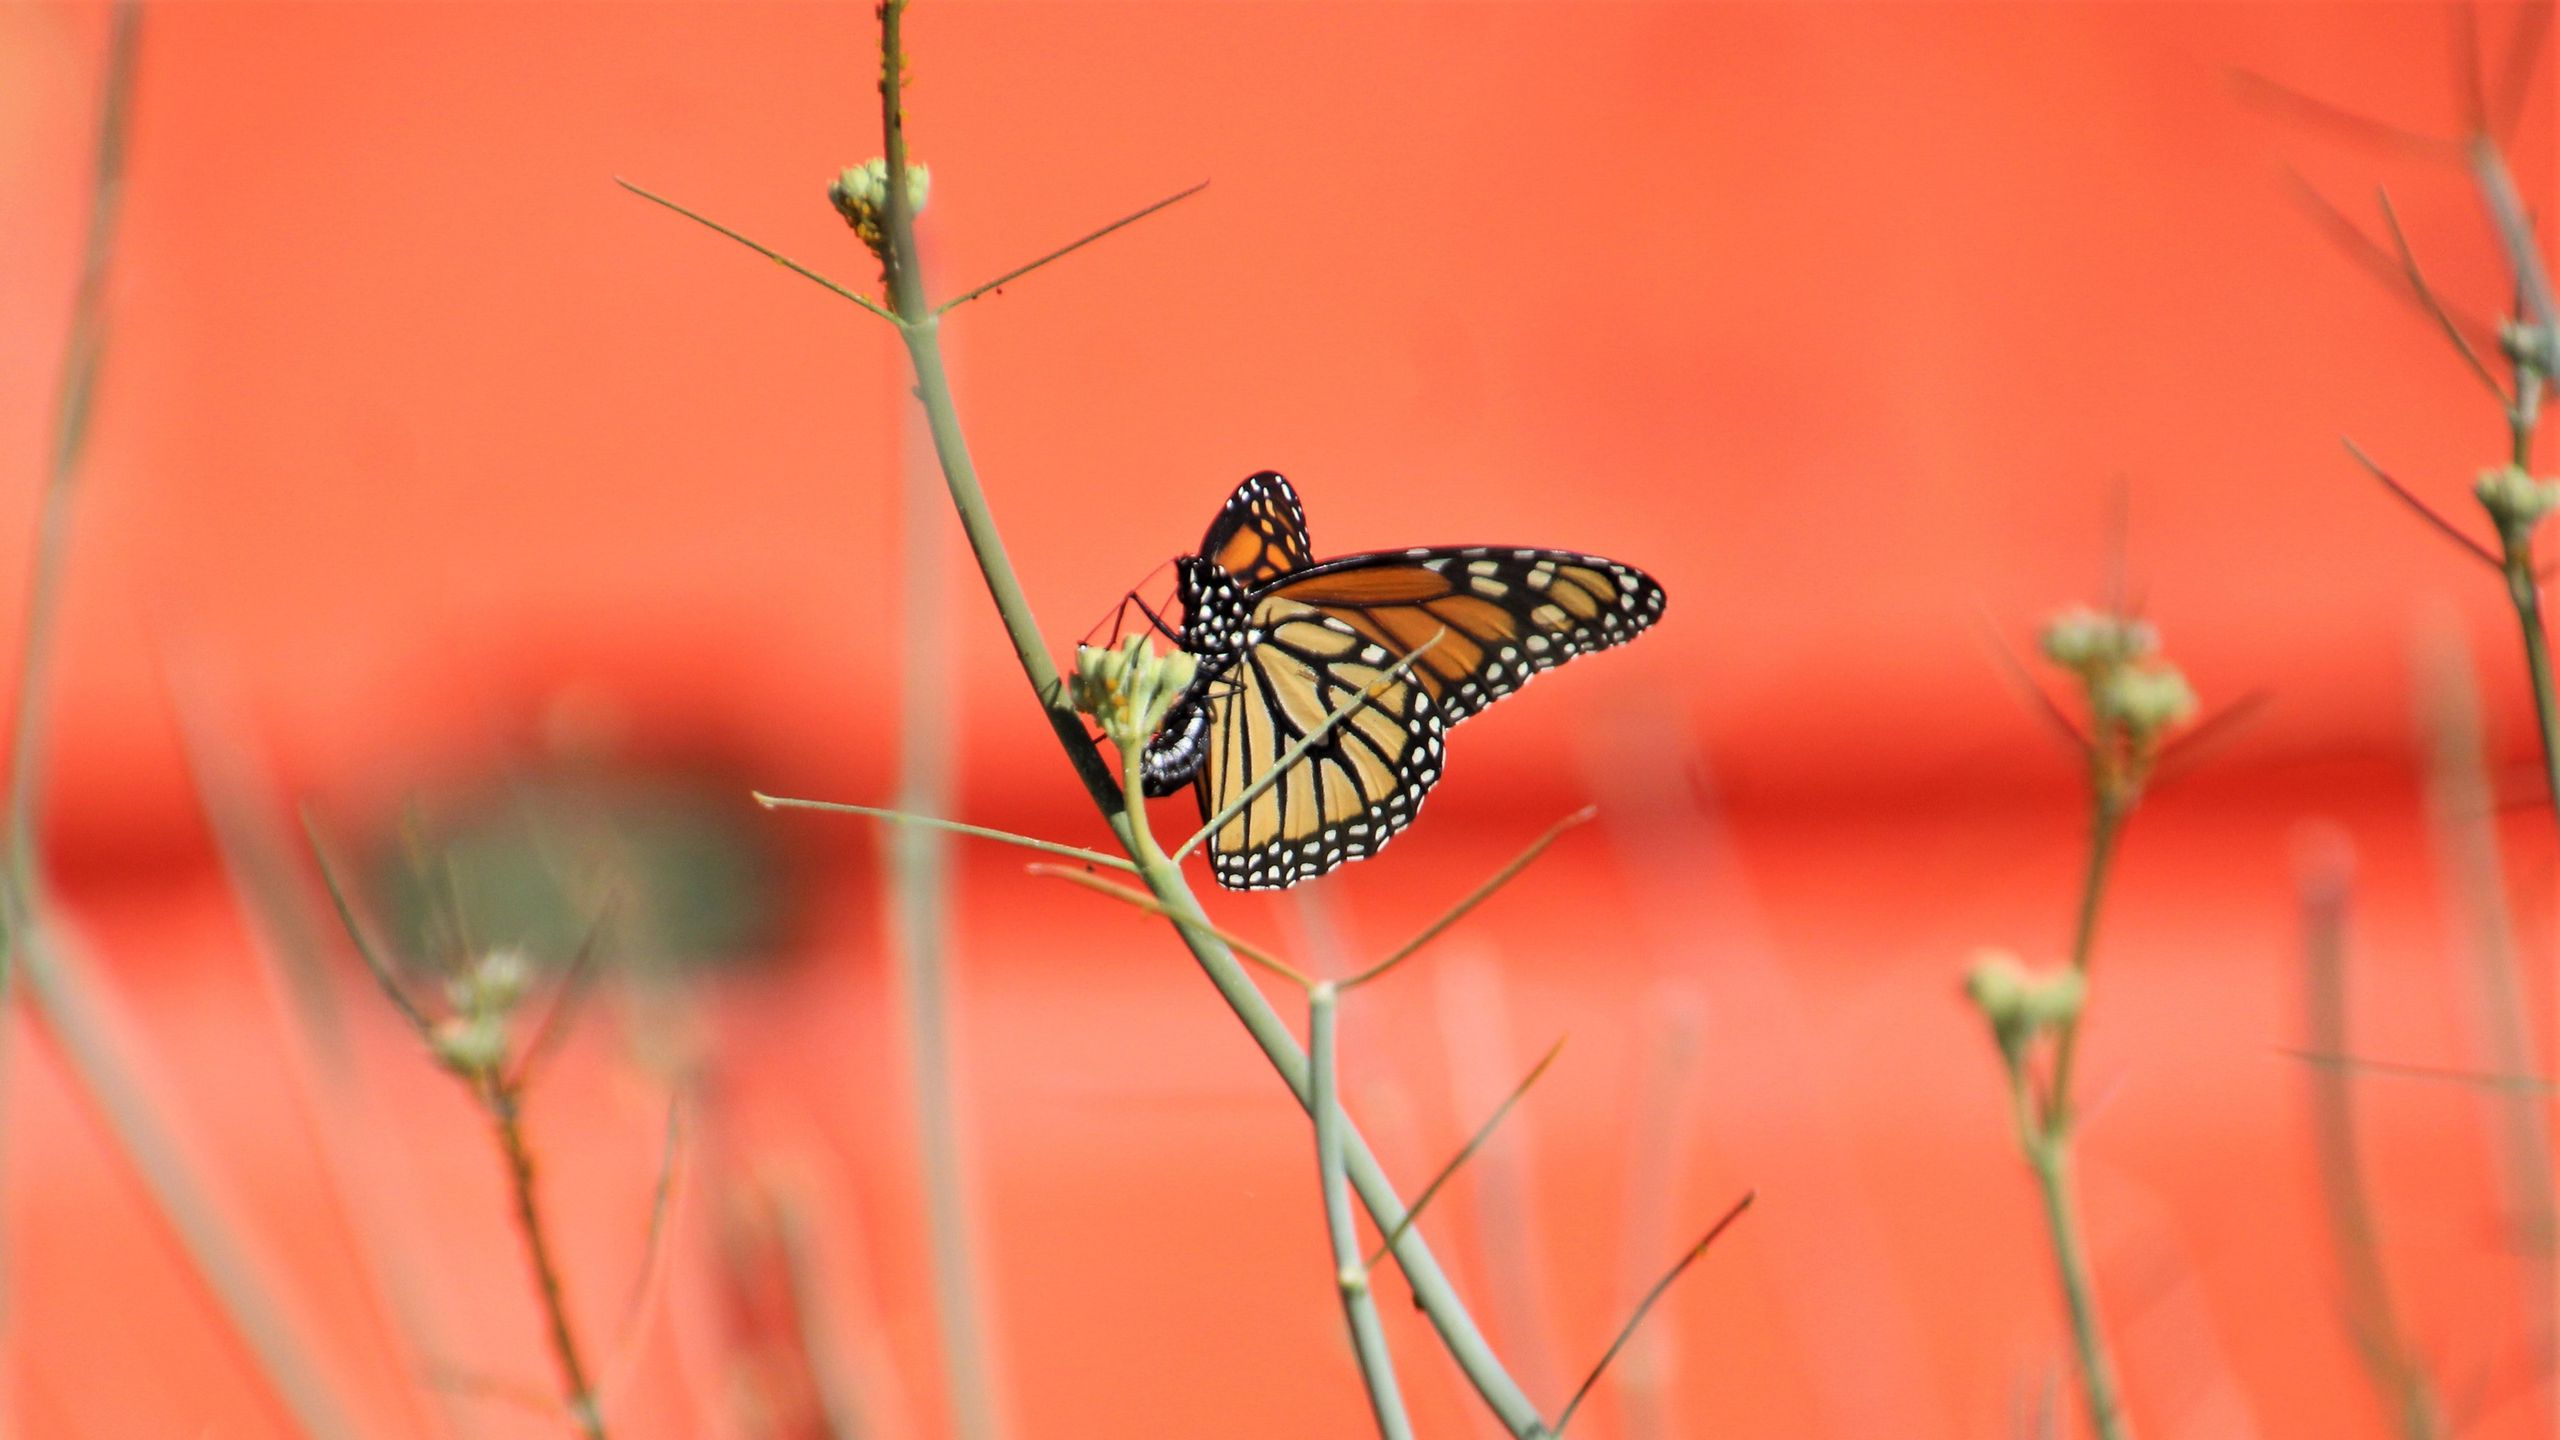 Download wallpaper 2560x1440 butterfly, wings, branches, pattern